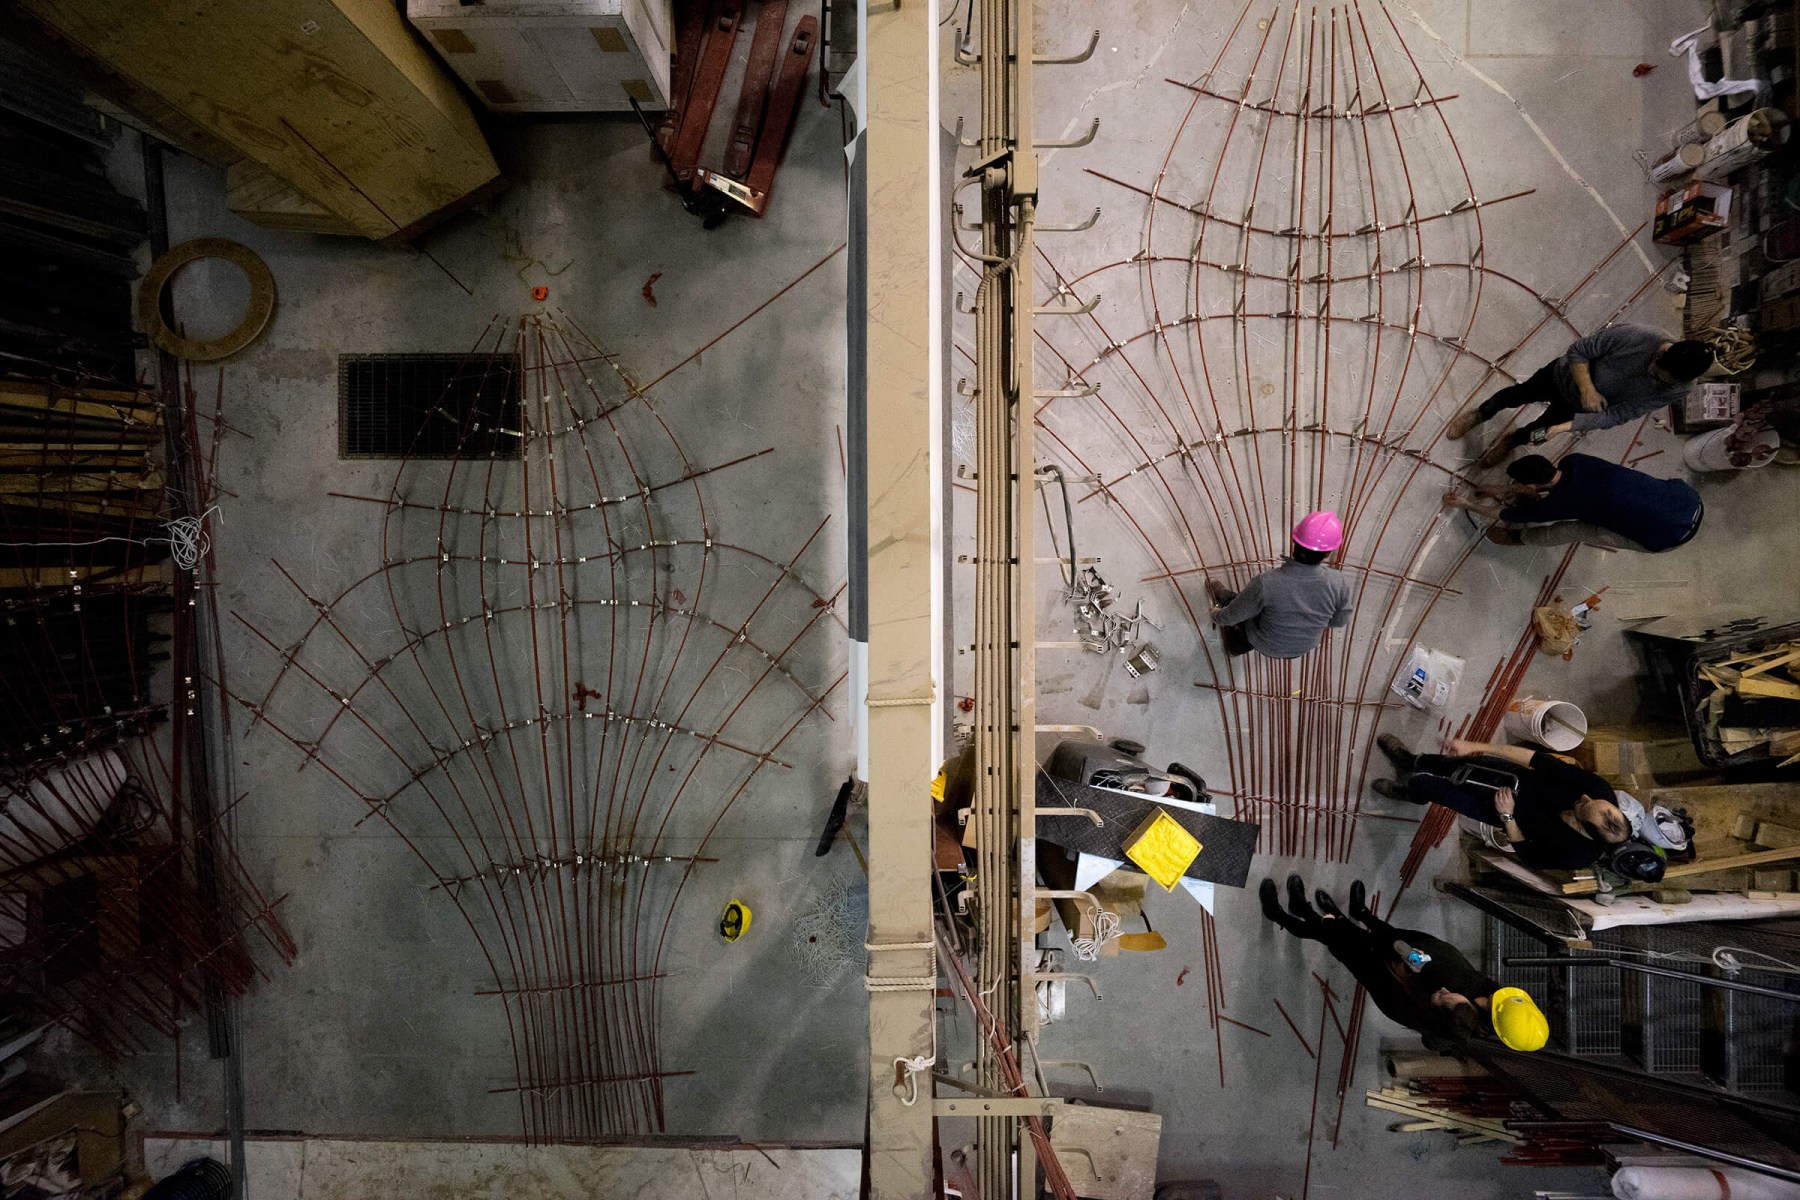 An overhead view of a wire structure at the Centre for Architectural Structures. Photo by Lancelot Coa and Technology